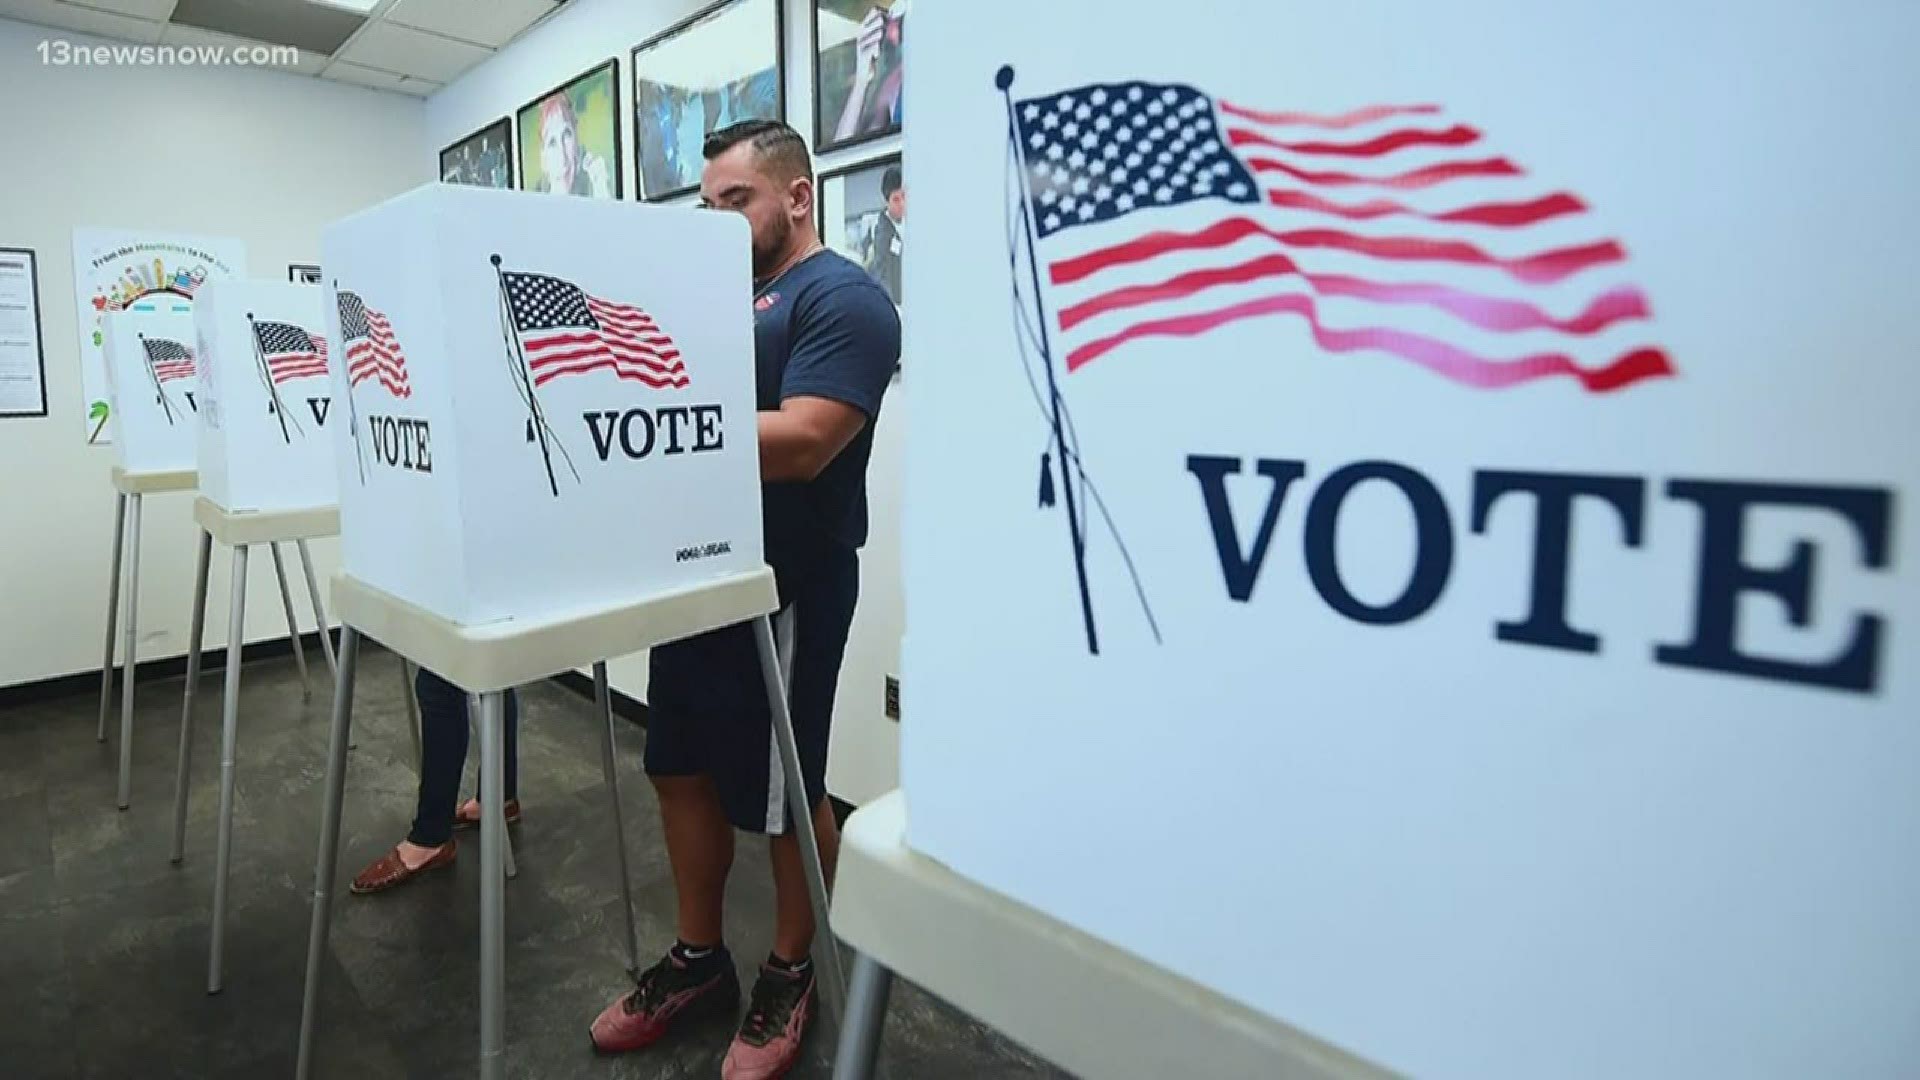 13News Now Mike Gooding explains how Republicans are concerned about the risk of voter fraud due to the encouragement of using absentee ballots during the pandemic.